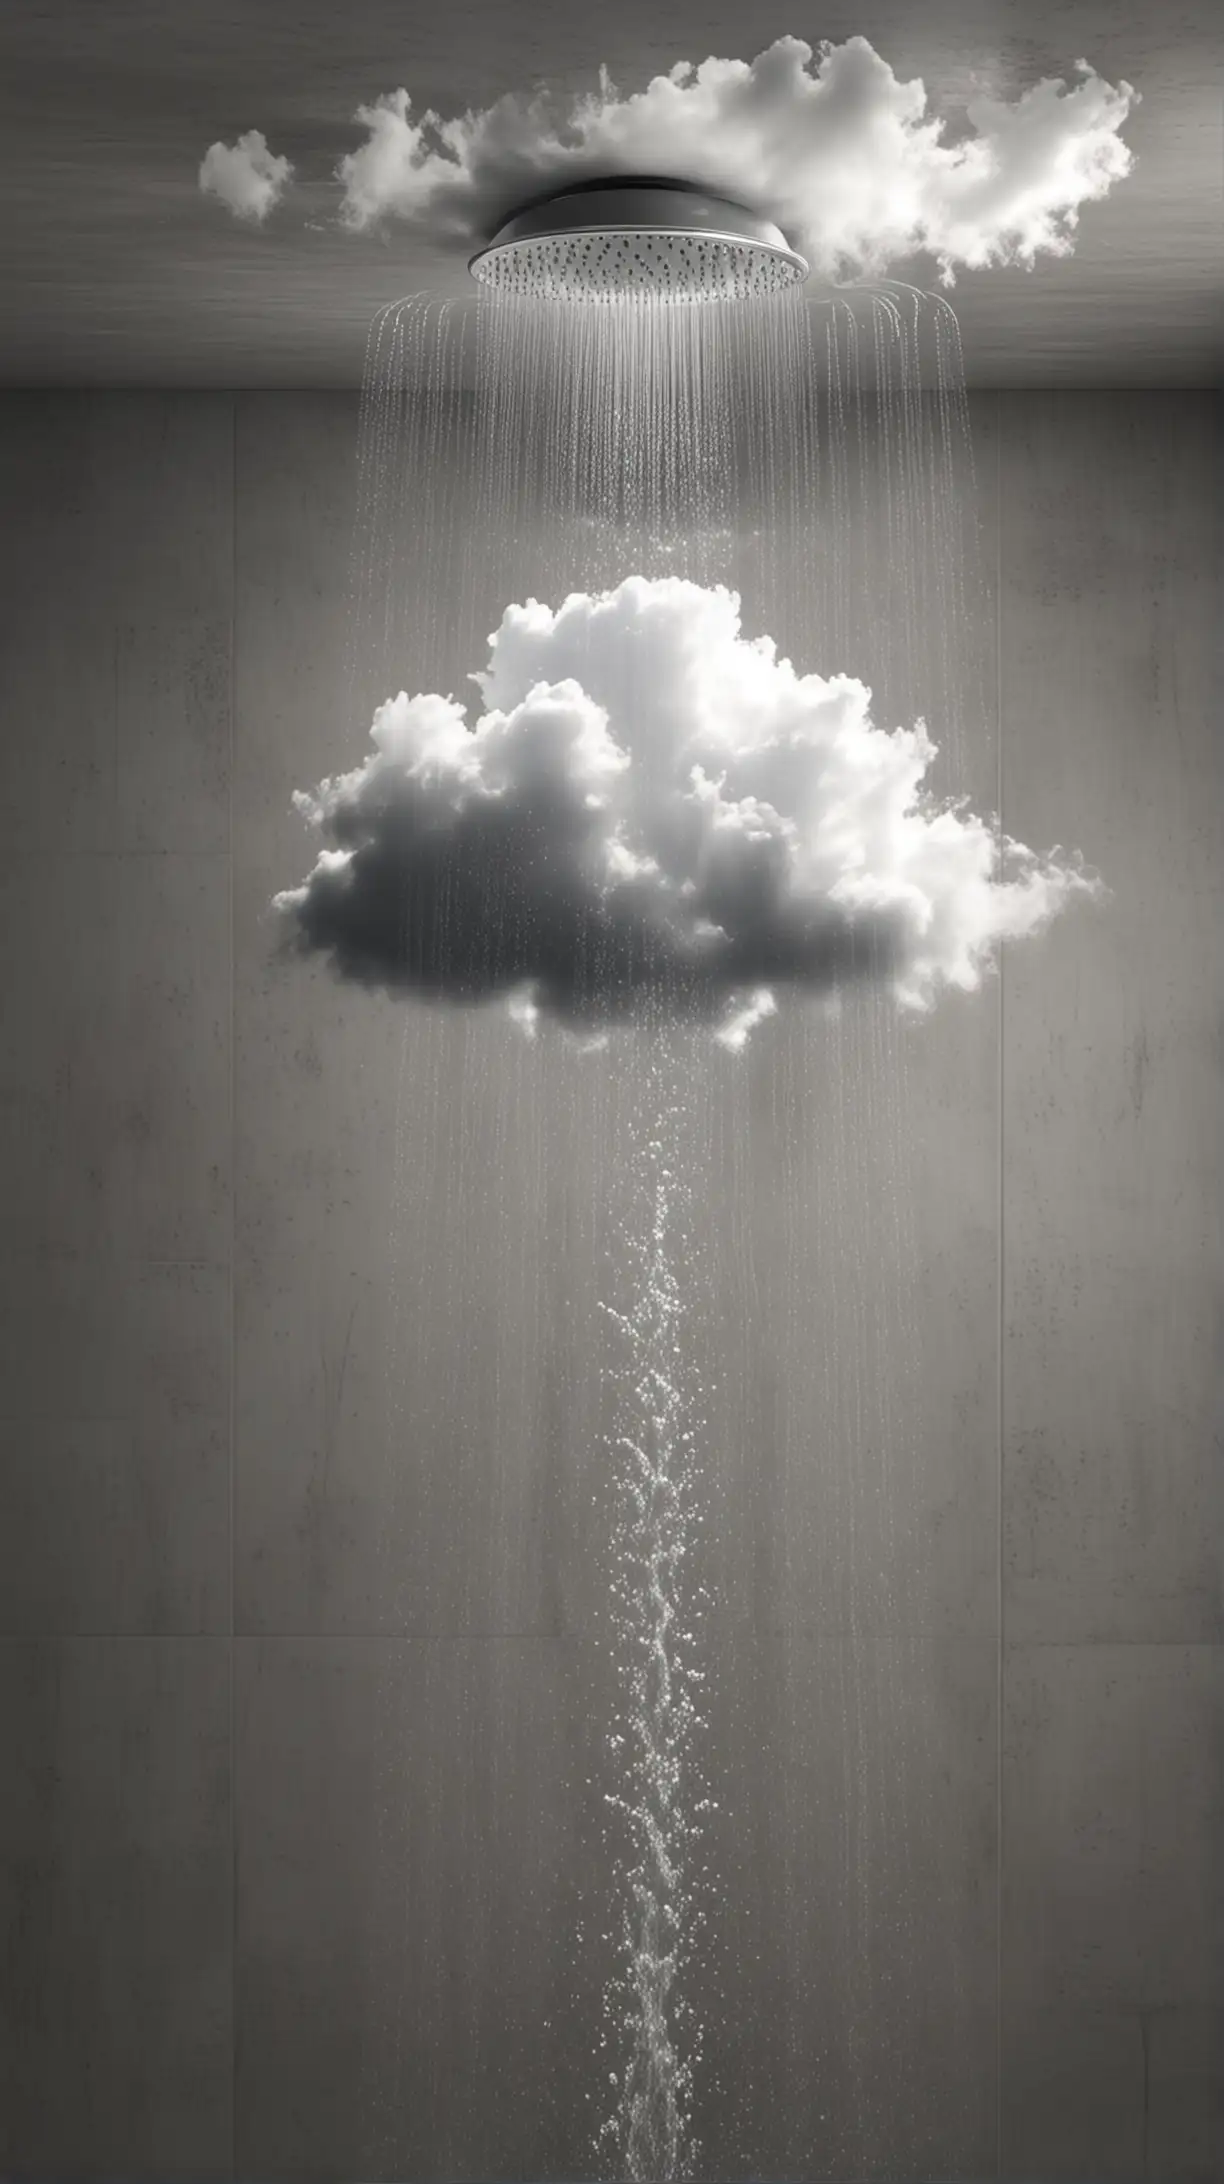 Shower Head Pouring Water into Fluffy Cloud Surrealistic Digital Art